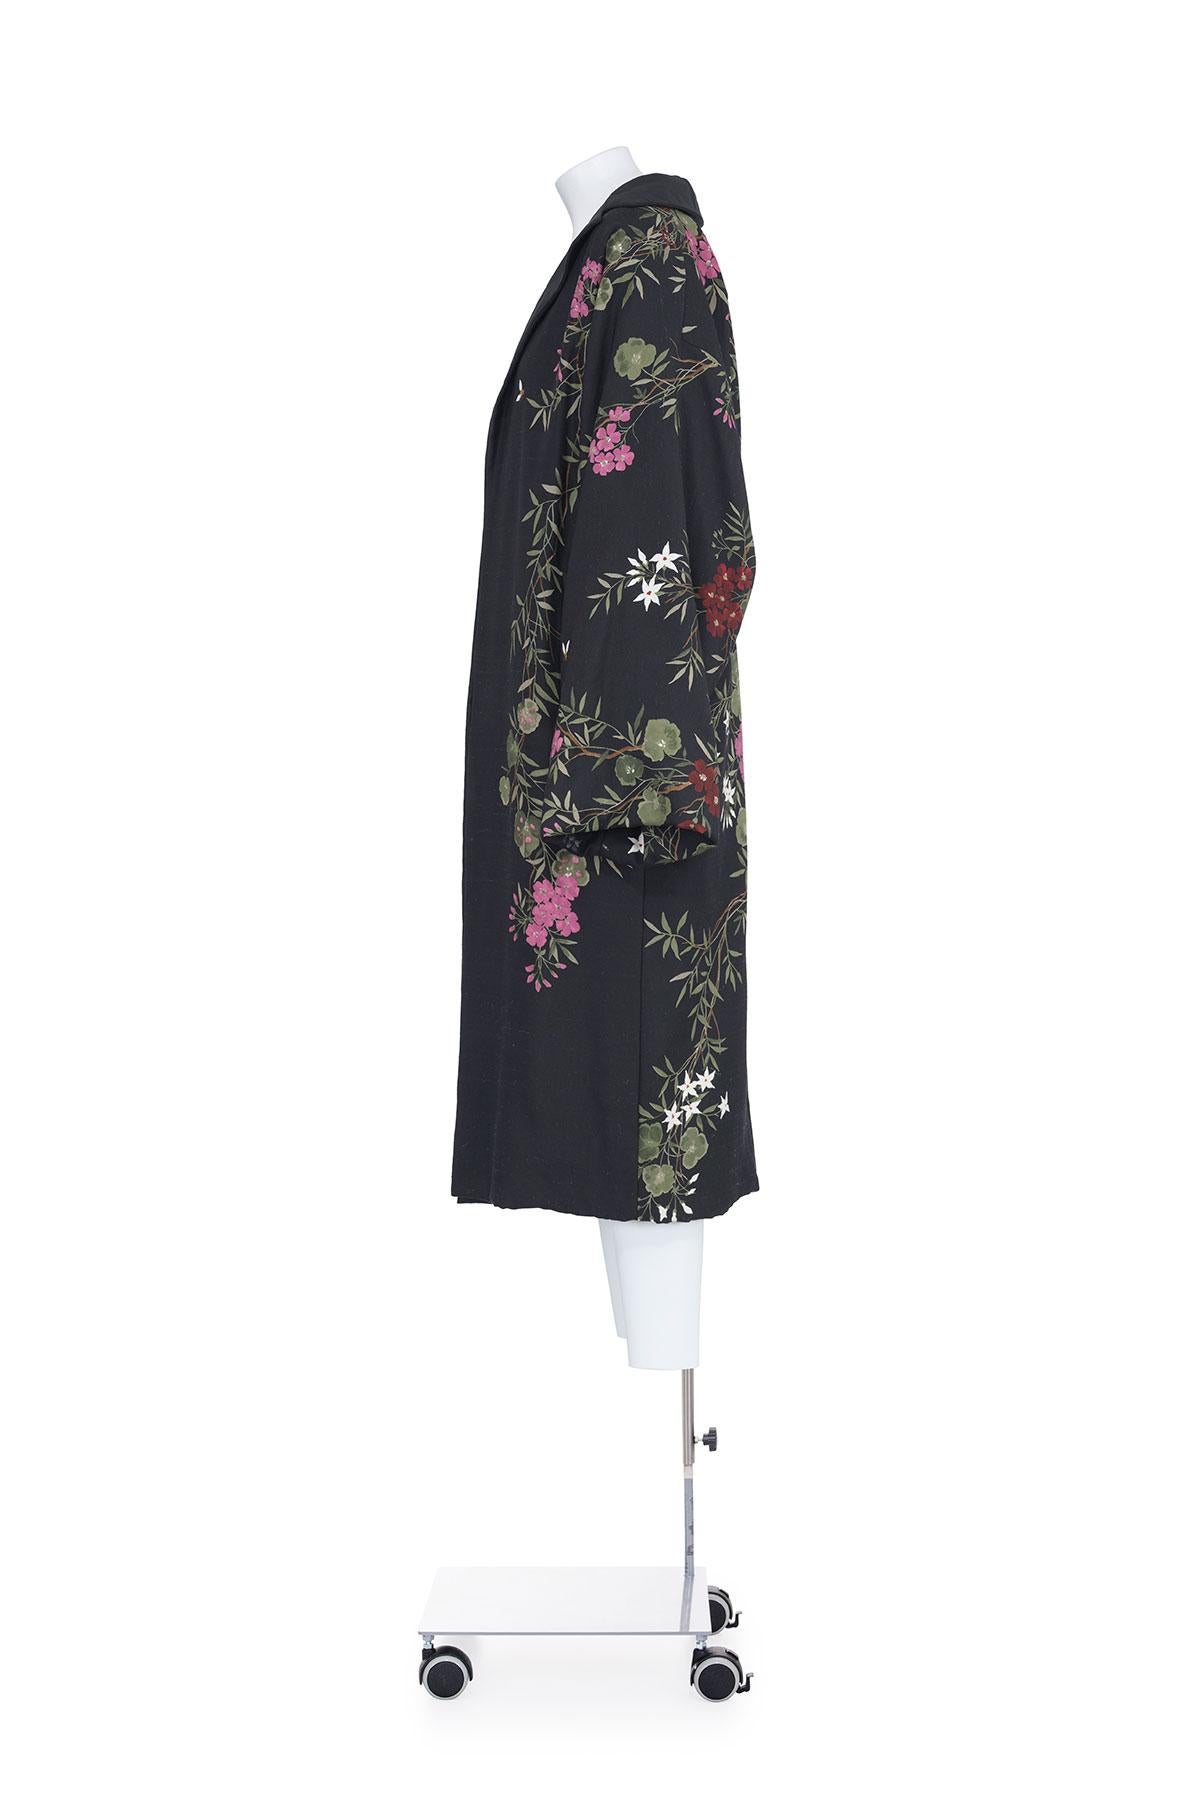 Fall Winter 1998 rare floral painted shantung kimono coat by Dolce&Gabbana.
Lightweight padded.
Two pockets.
Fully lined.
The composition is 100% silk.

